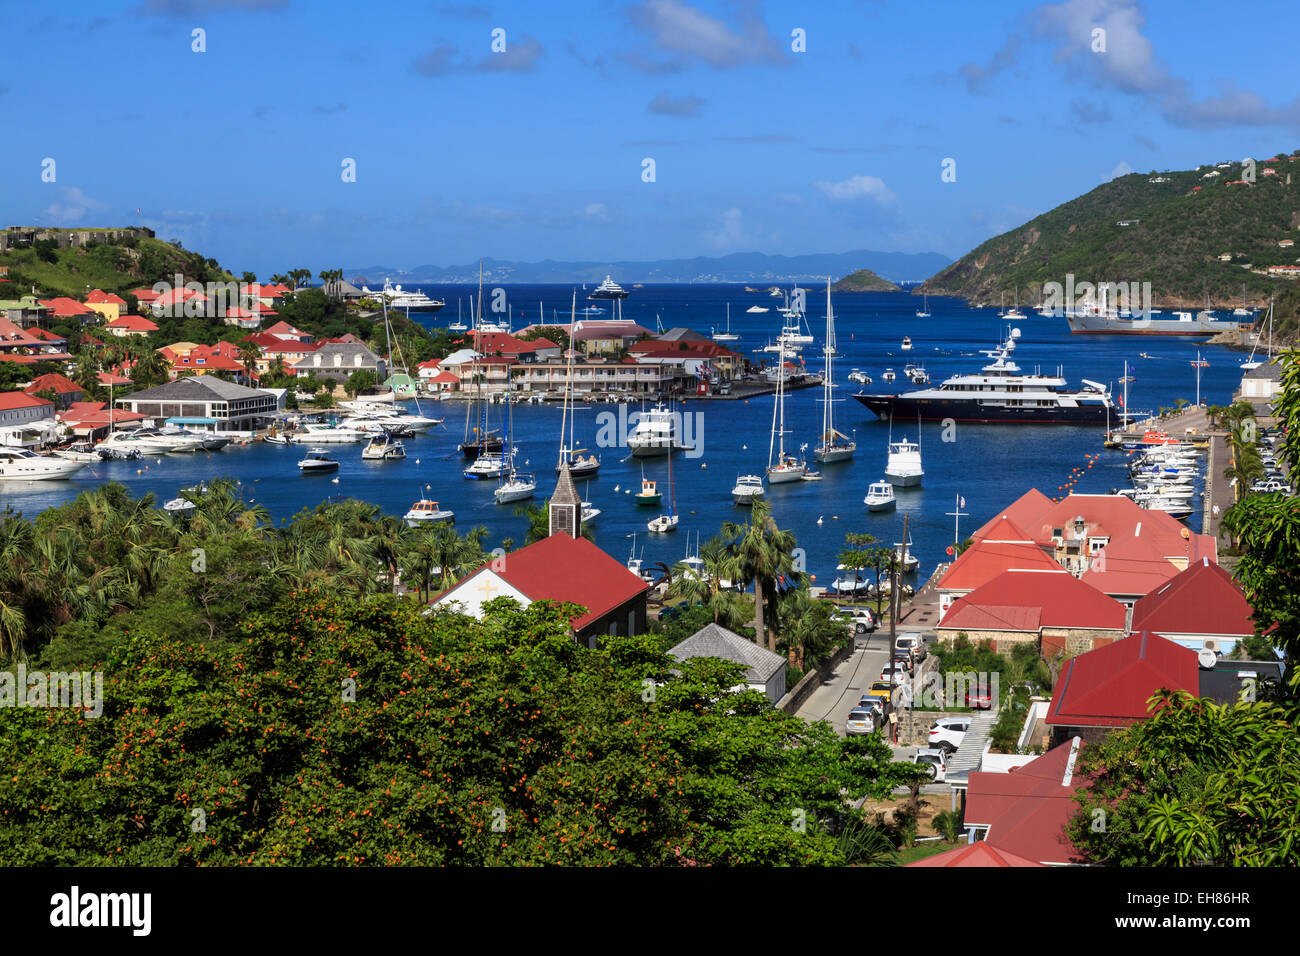 Elevated view of Fort Oscar, Anglican church and yachts in harbour, Gustavia, St. Barthelemy, West Indies Stock Photo